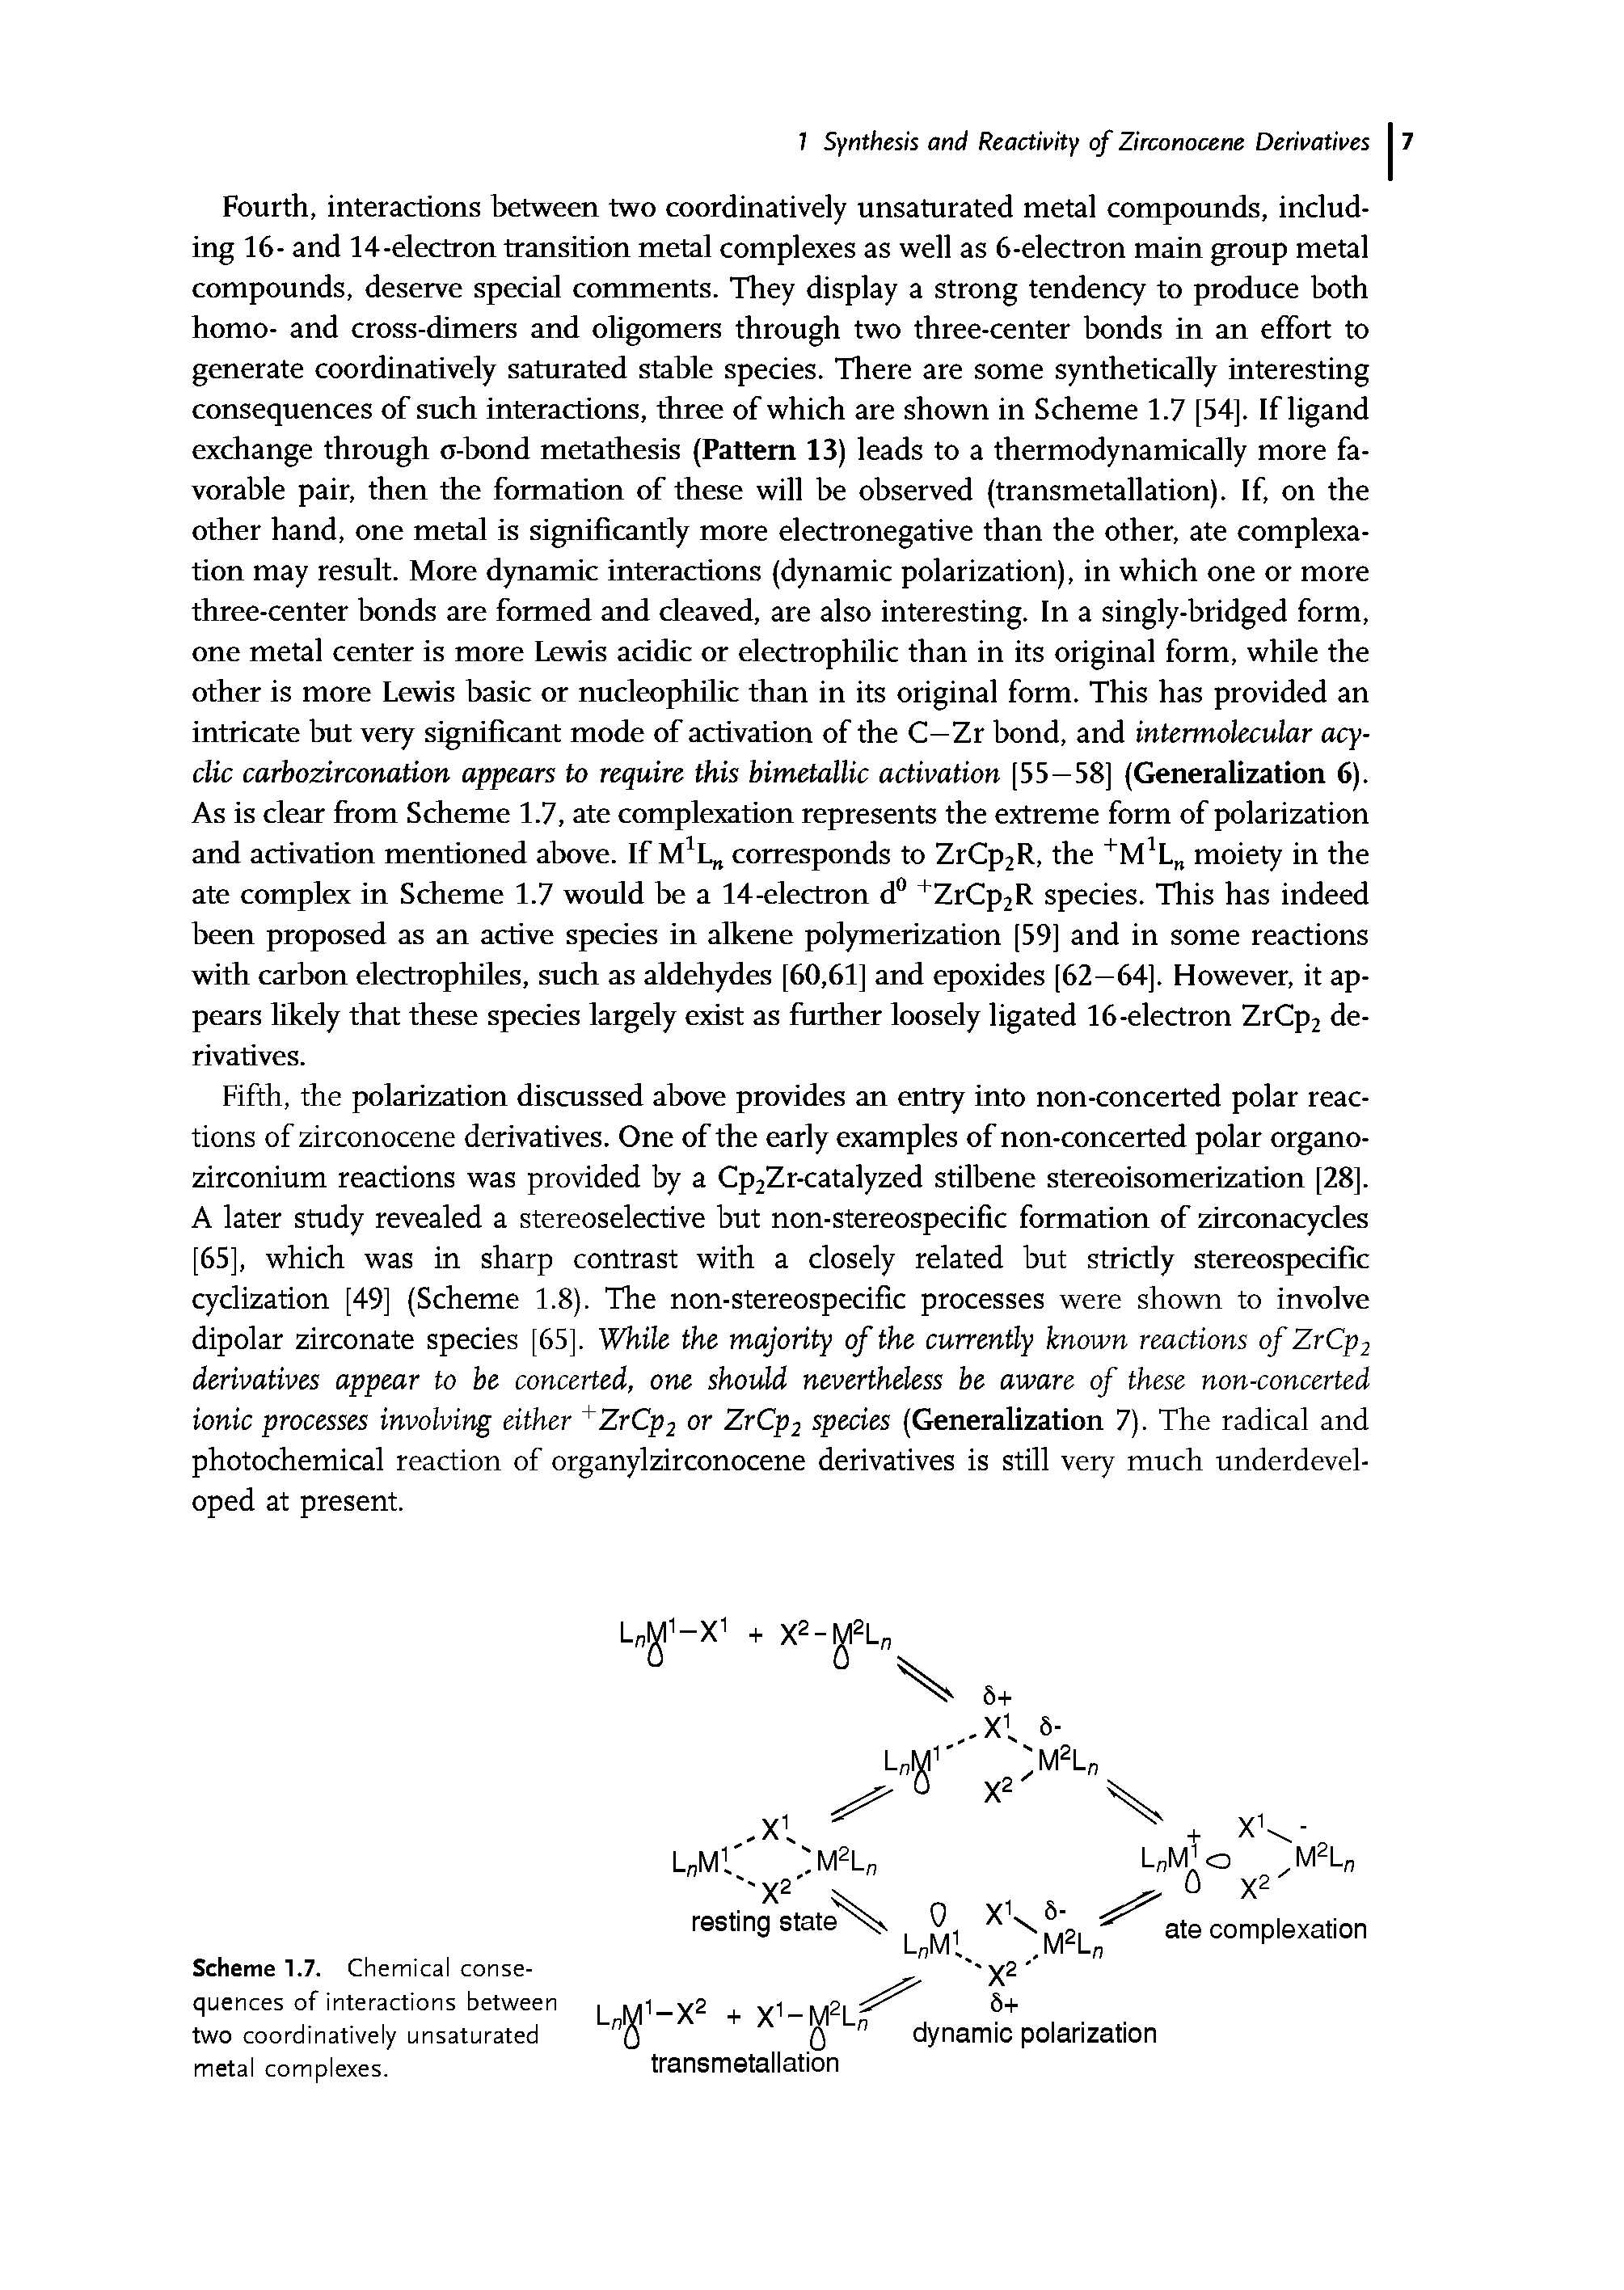 Scheme 1.7. Chemical consequences of interactions between two coordinatively unsaturated metal complexes.